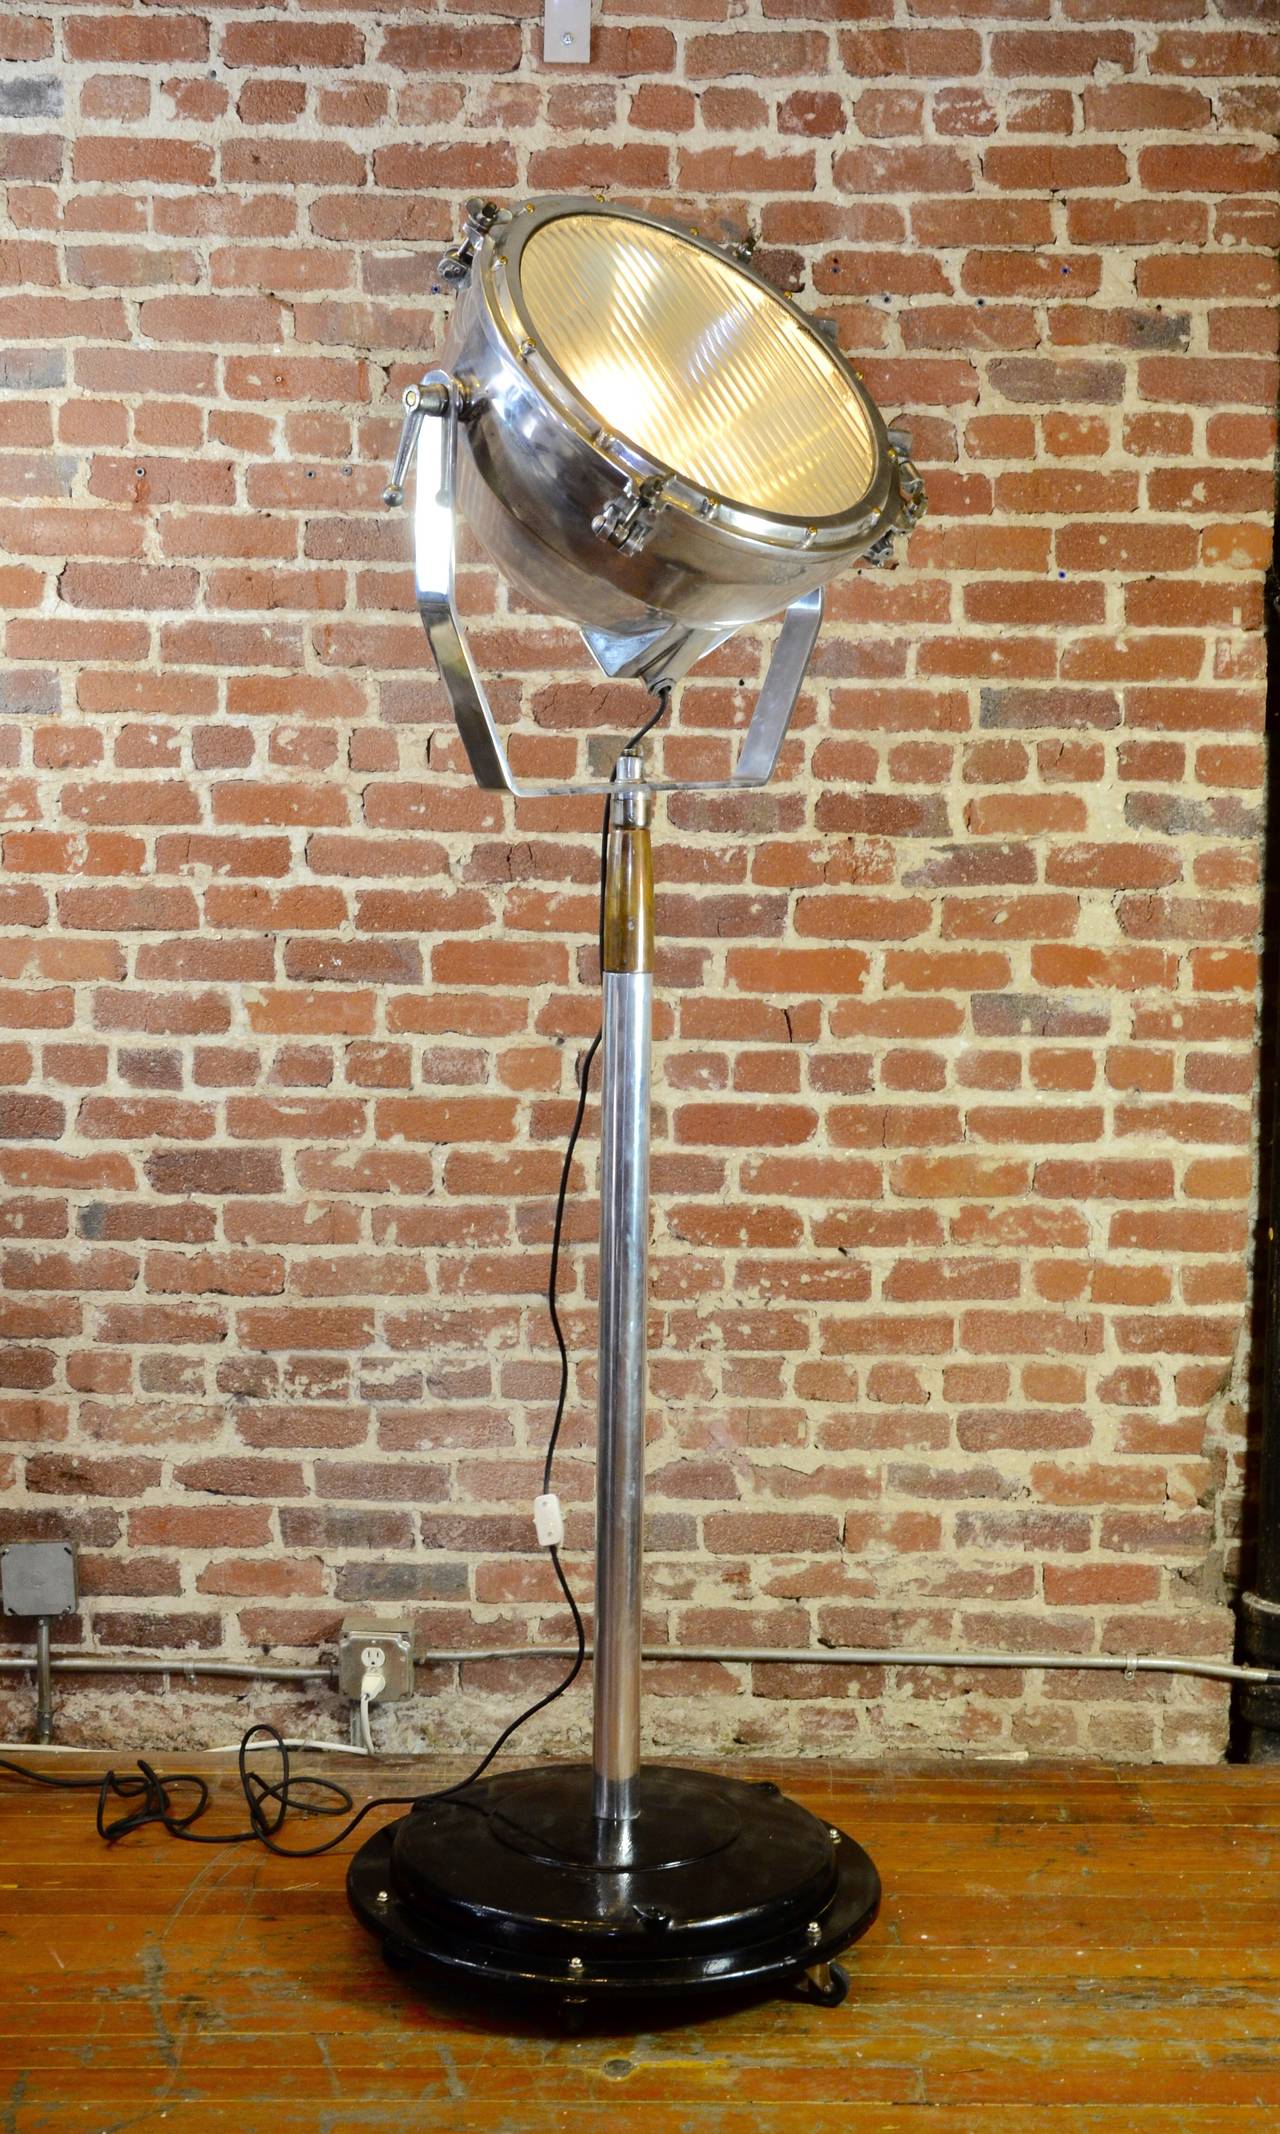 These exceptional fixtures are decommissioned WWII aircraft carrier spotlights. We've painstakingly restored, and polished them for re-assignment in the 21st century. Mounted to heavy duty Industrial iron bases and rewired for standard bulbs.